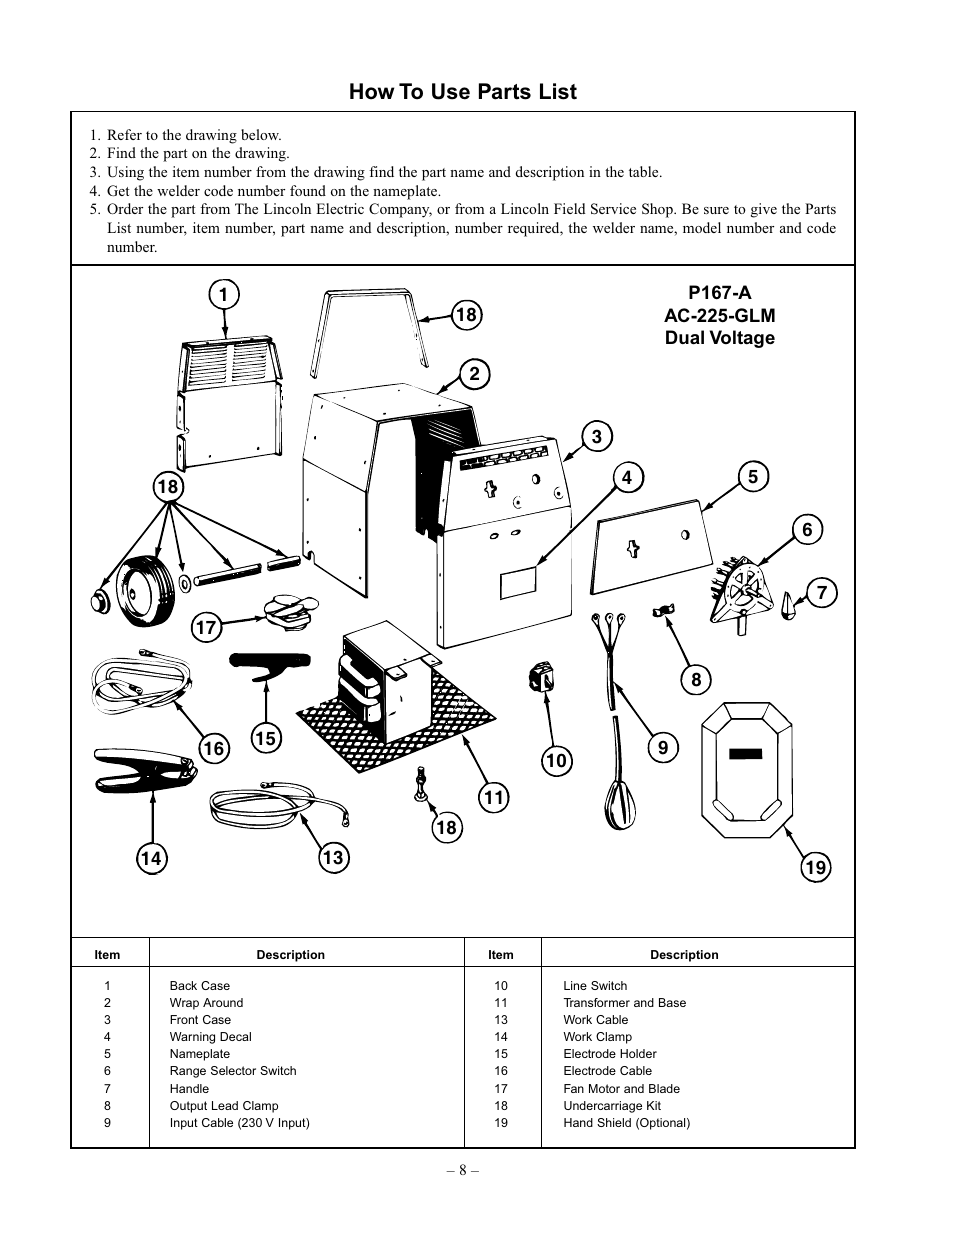 how-to-use-parts-list-lincoln-electric-im348-ac-225-glm-user-manual